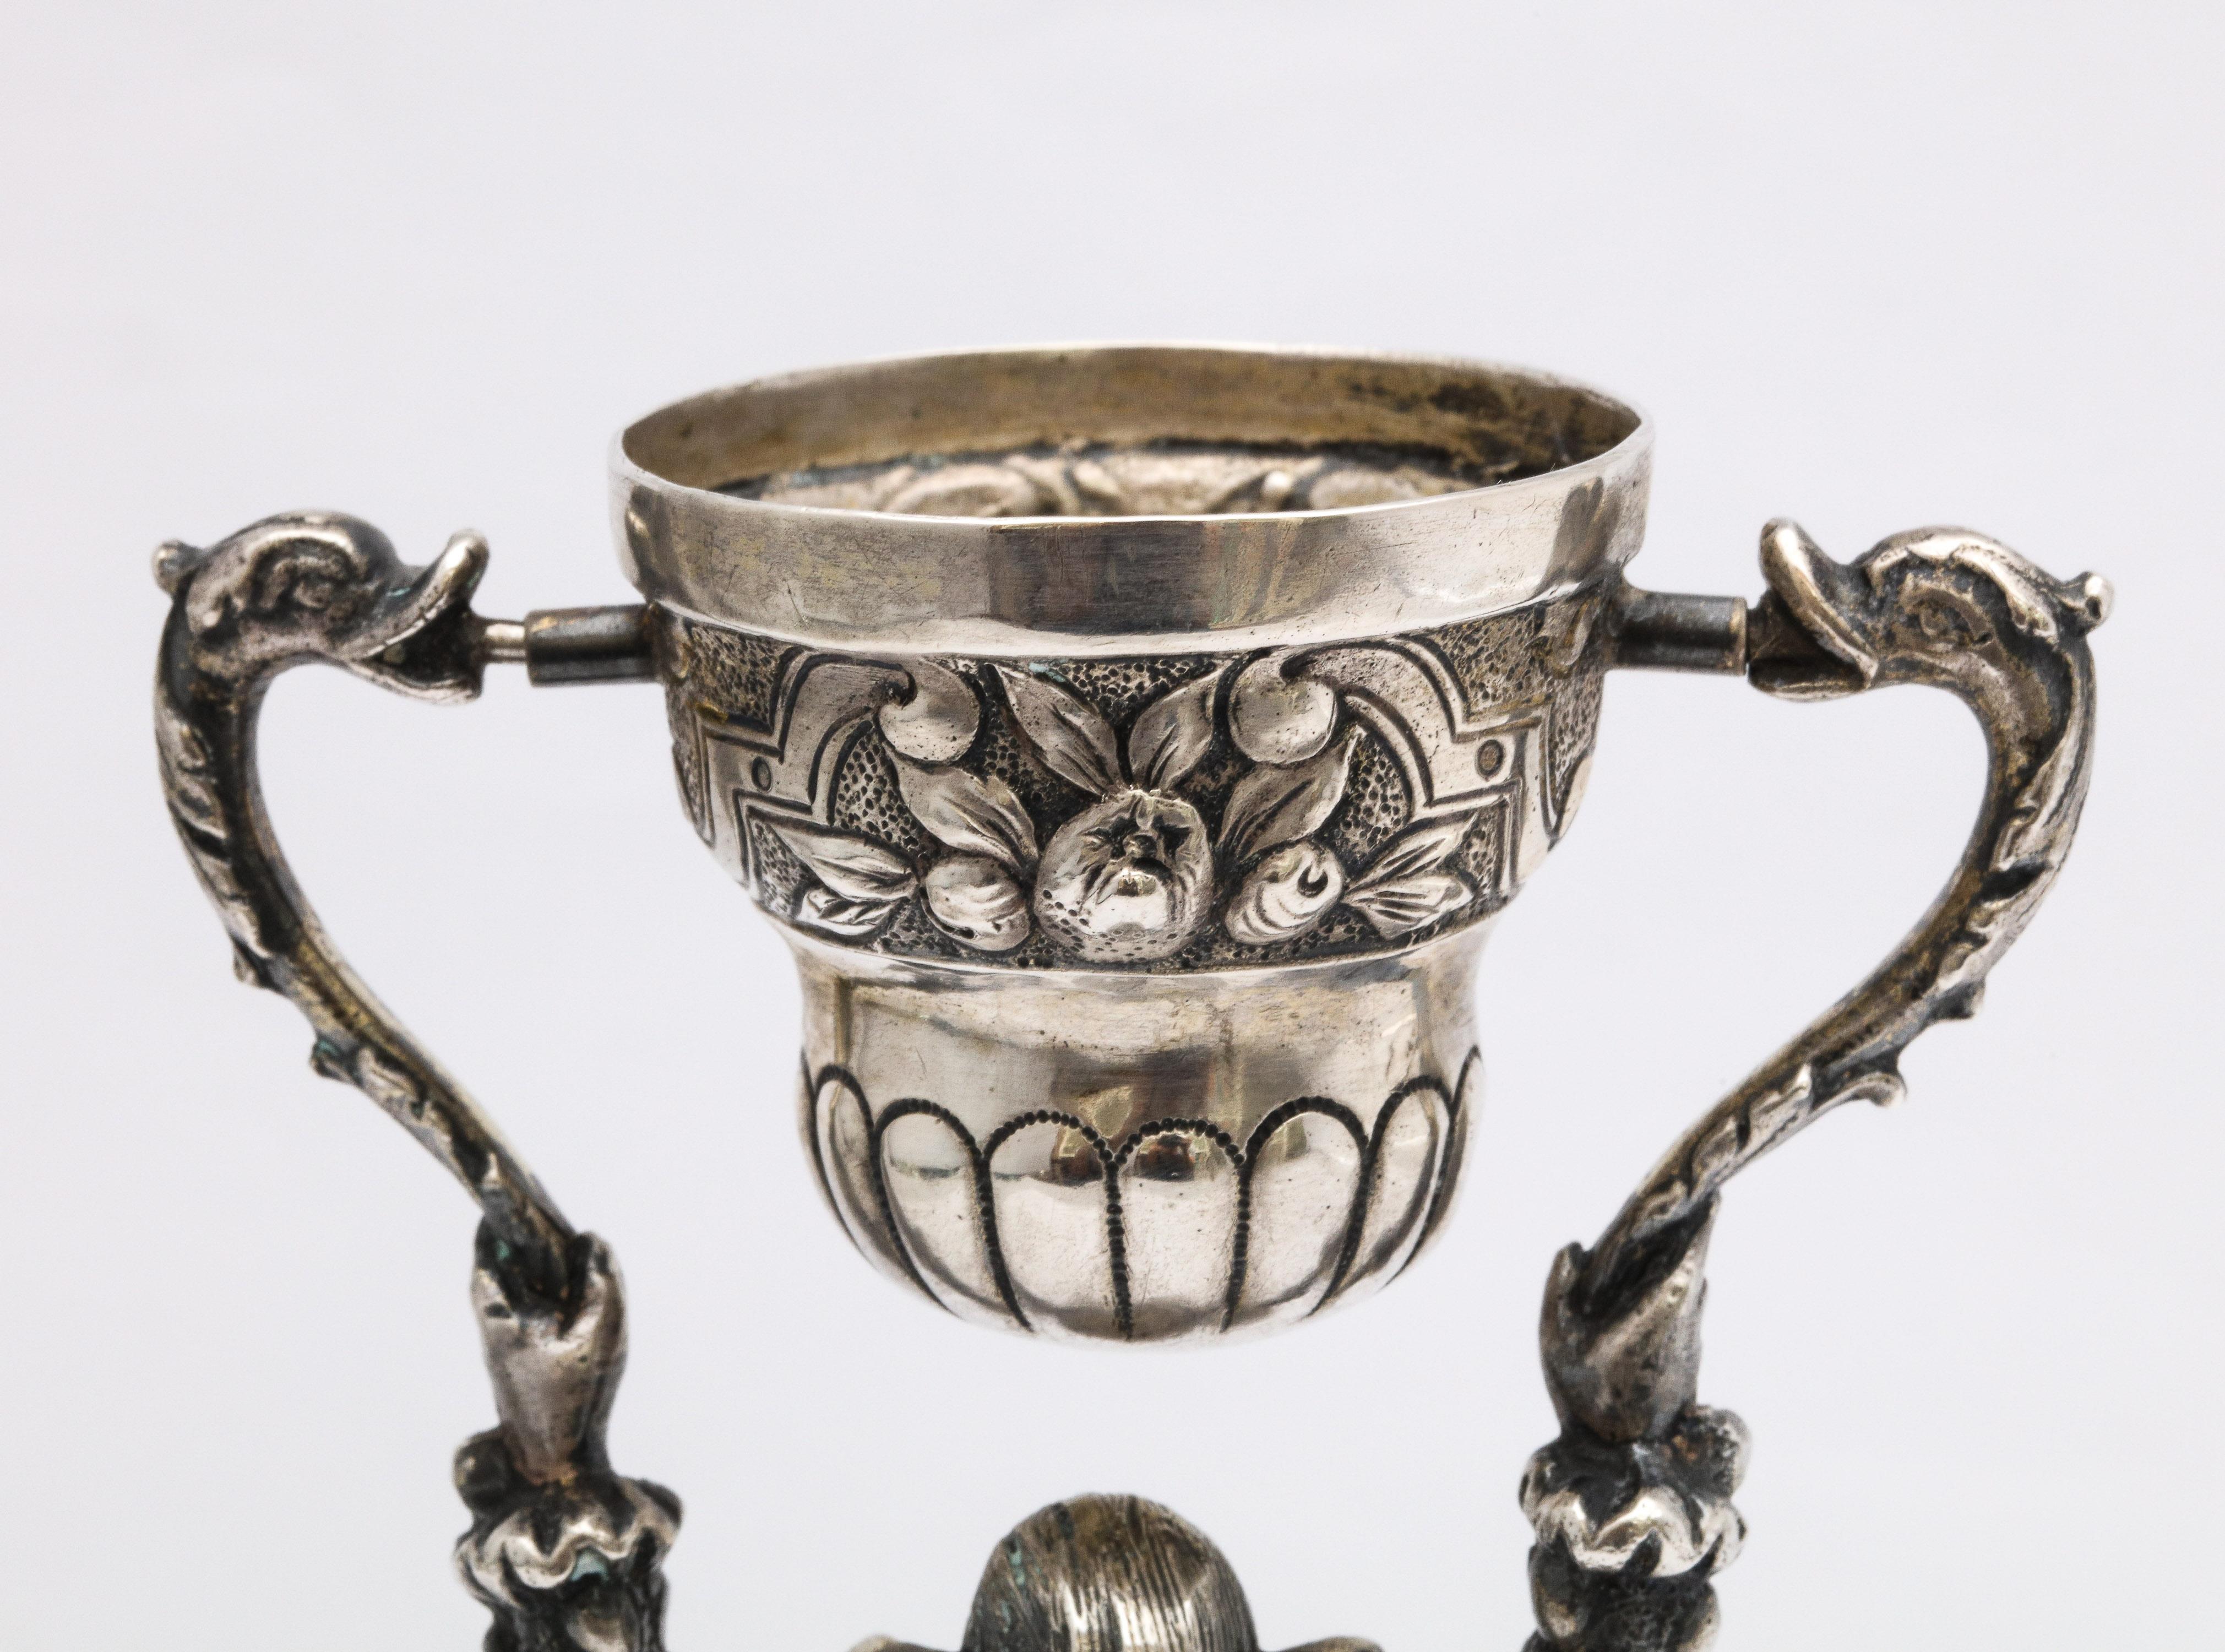 Dutch Victorian Period Continental Silver '.800' Wager/Marriage Cup 5